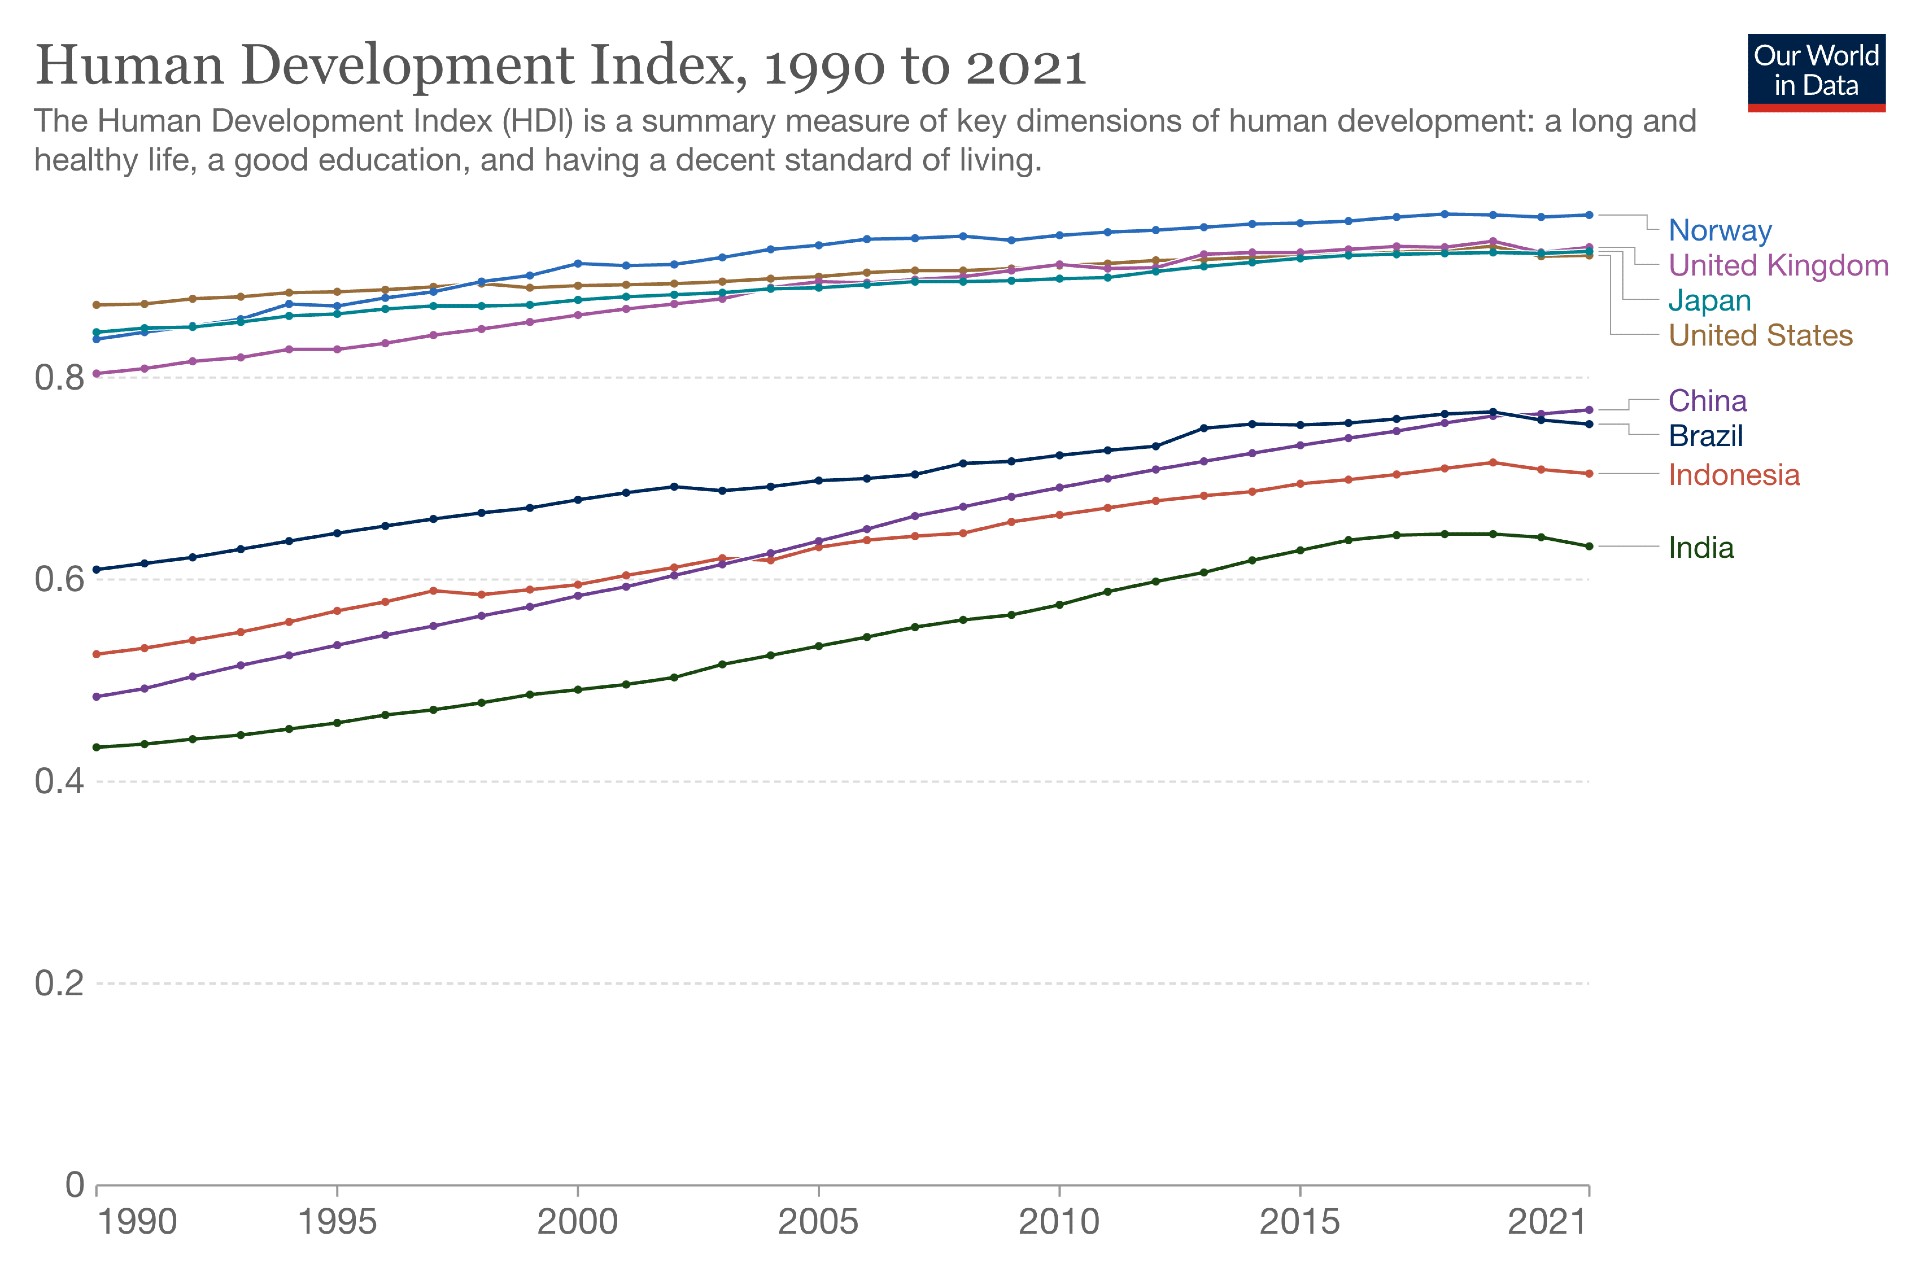 A chart showing the human development index from 1990 to 2021 for various countries.